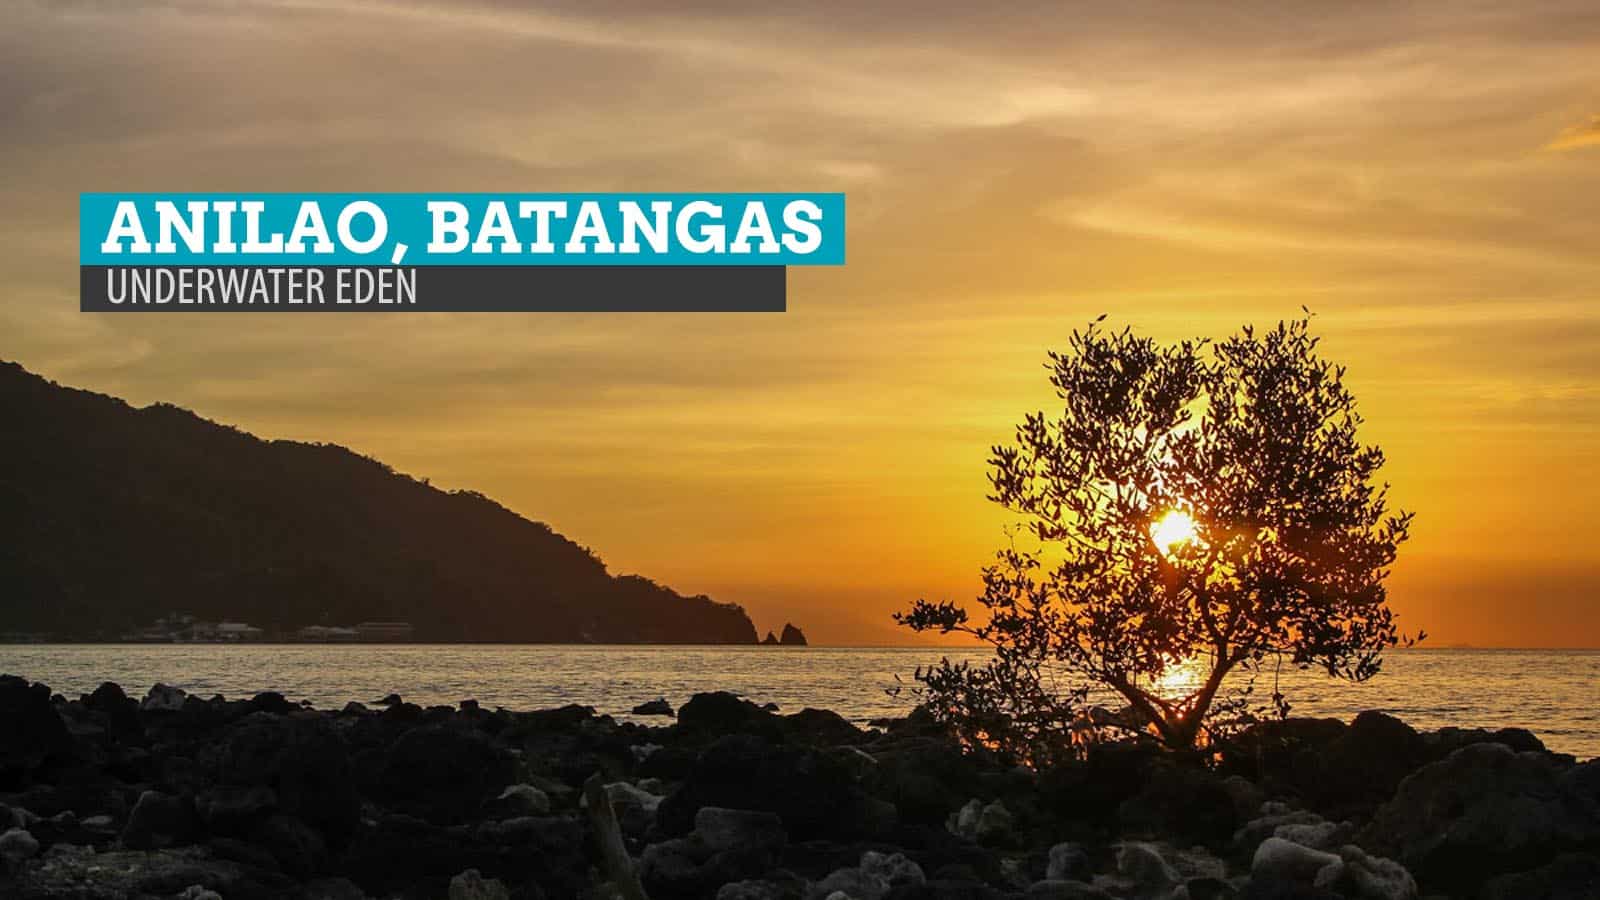 Anilao, Batangas: Above the Surface of an Underwater Eden